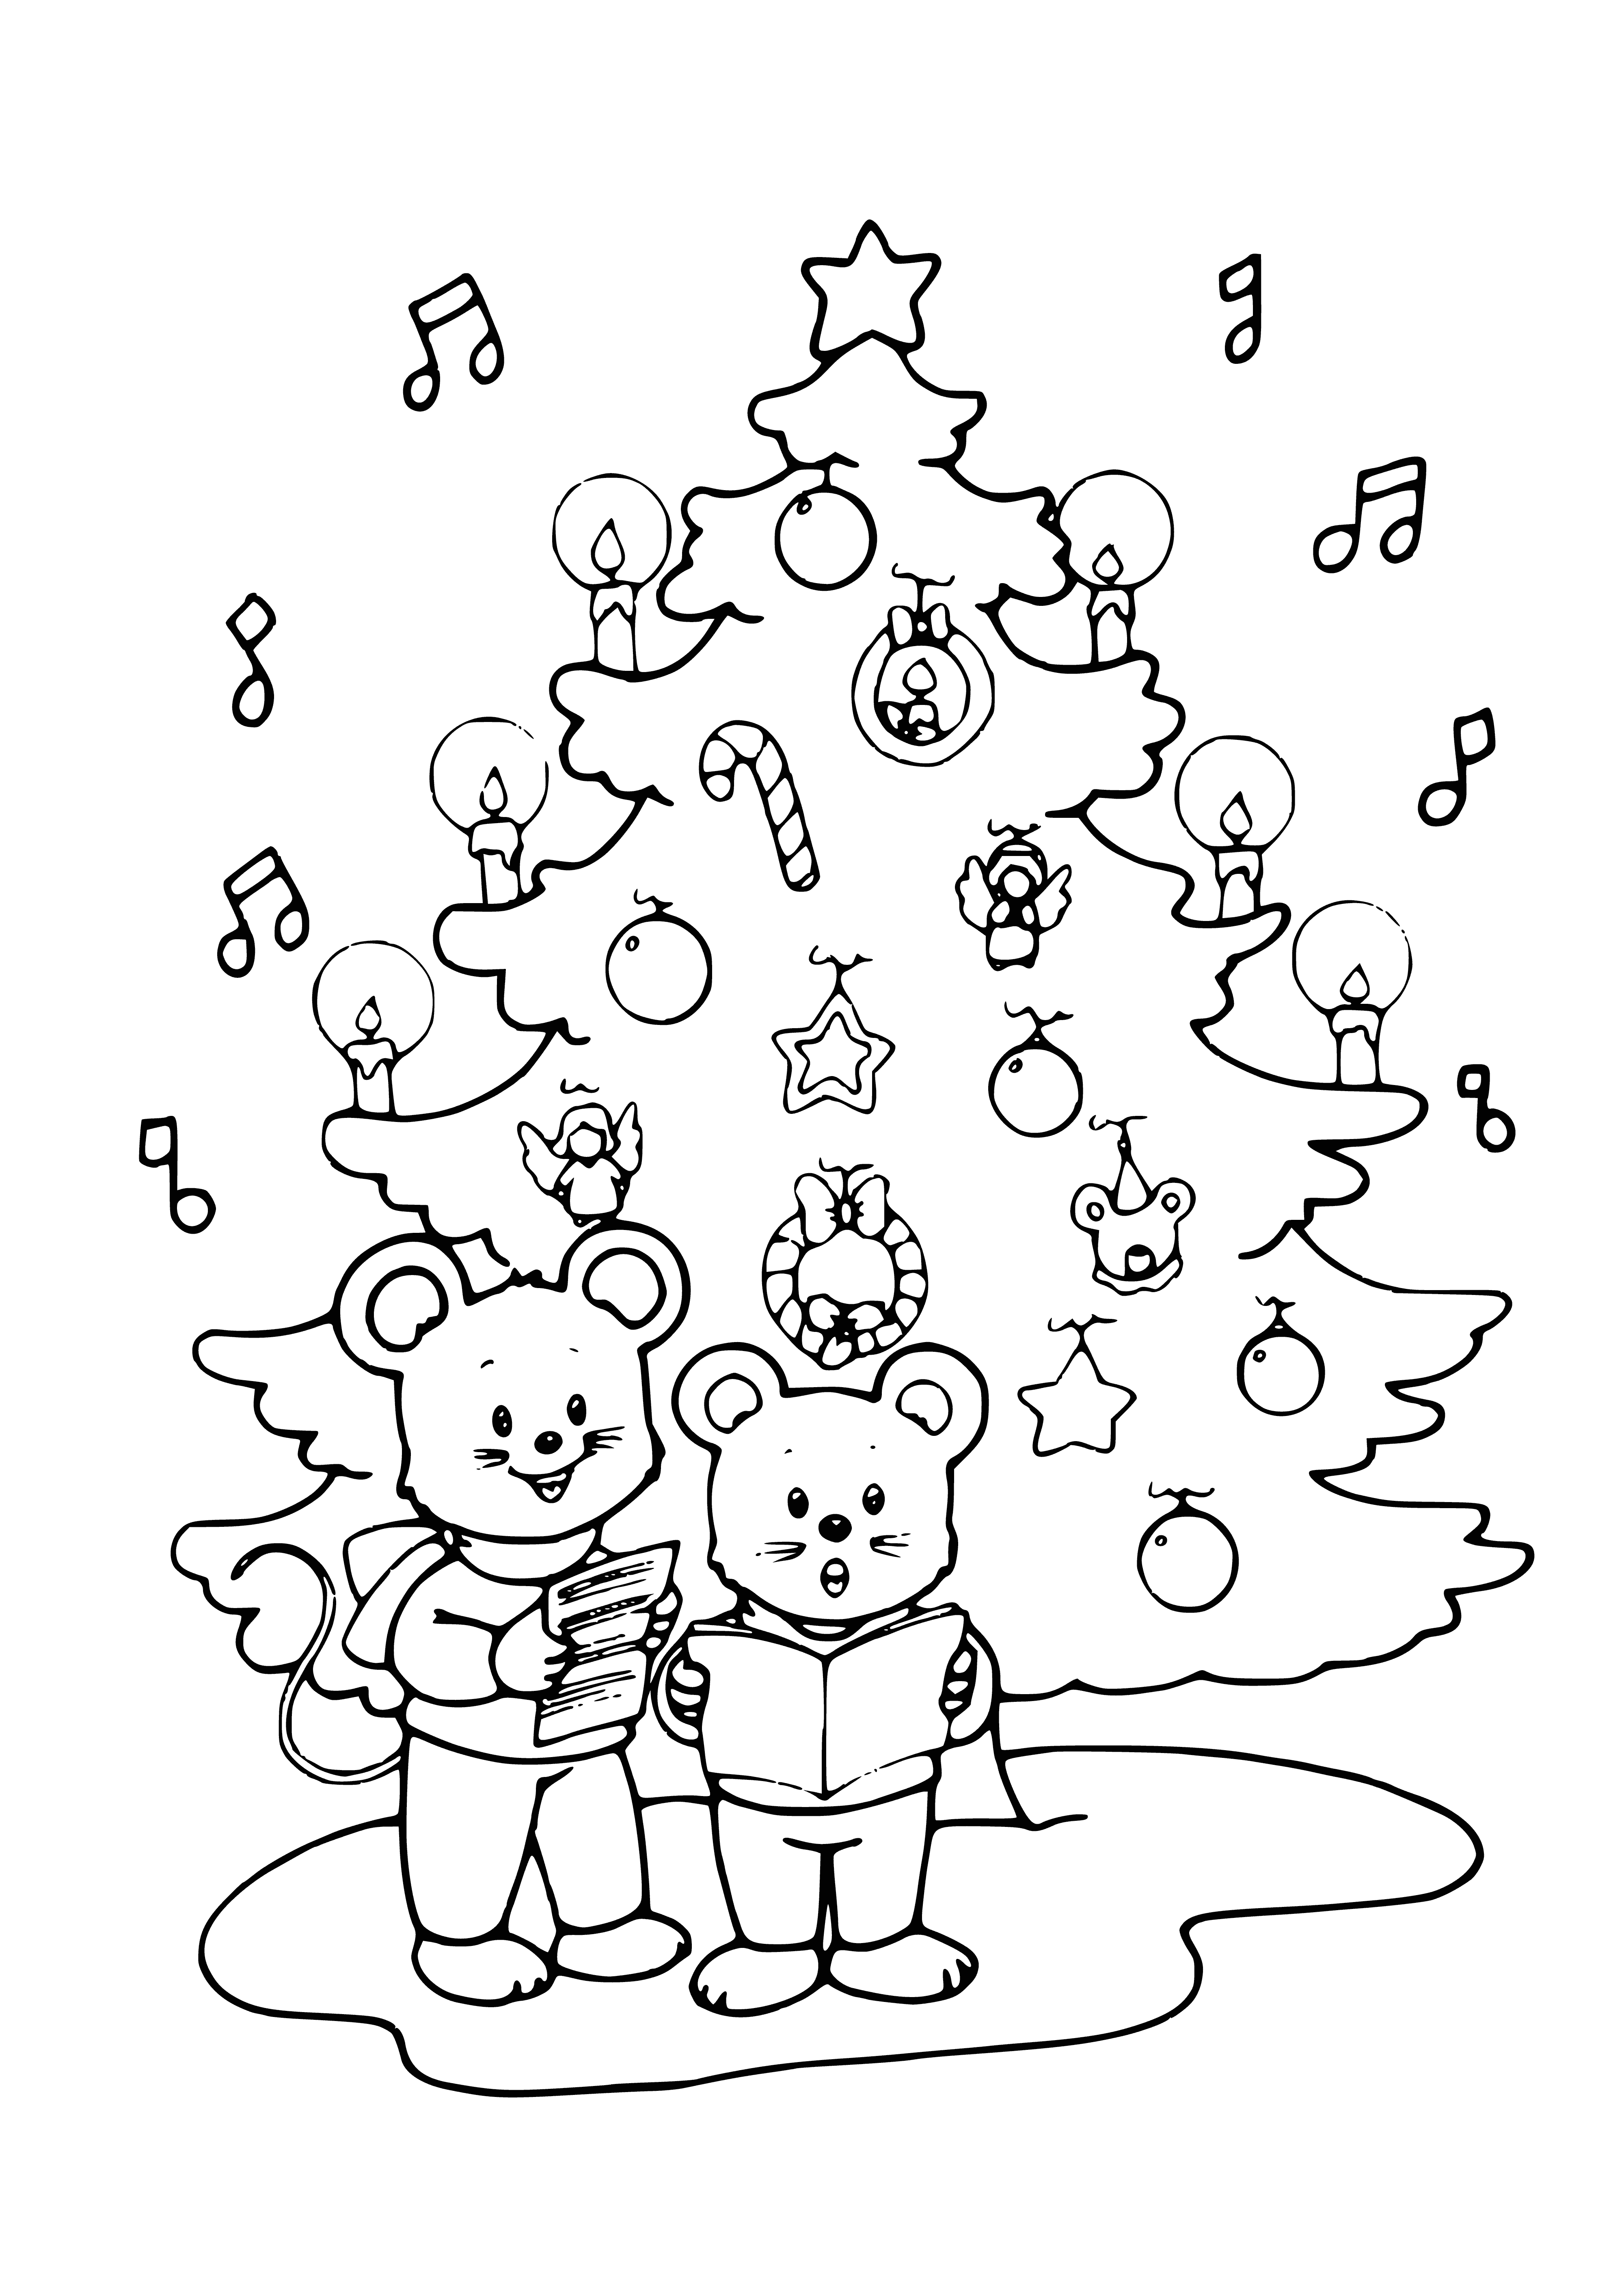 coloring page: Rats running/playing by a tree in a coloring page - small & brown.